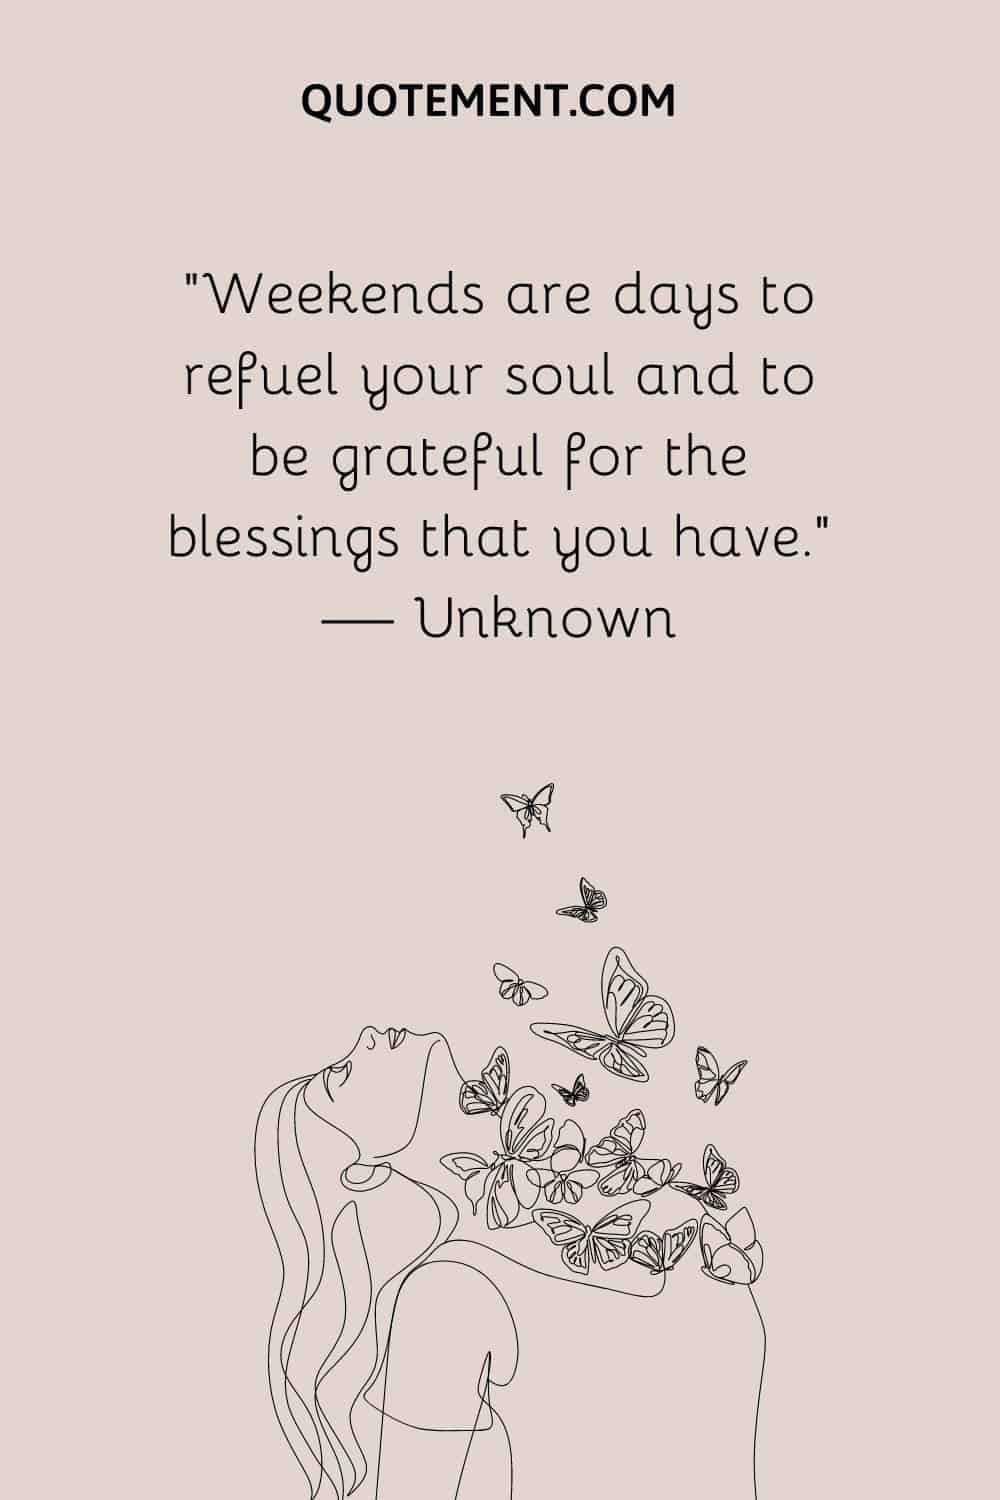 “Weekends are days to refuel your soul and to be grateful for the blessings that you have.” — Unknown